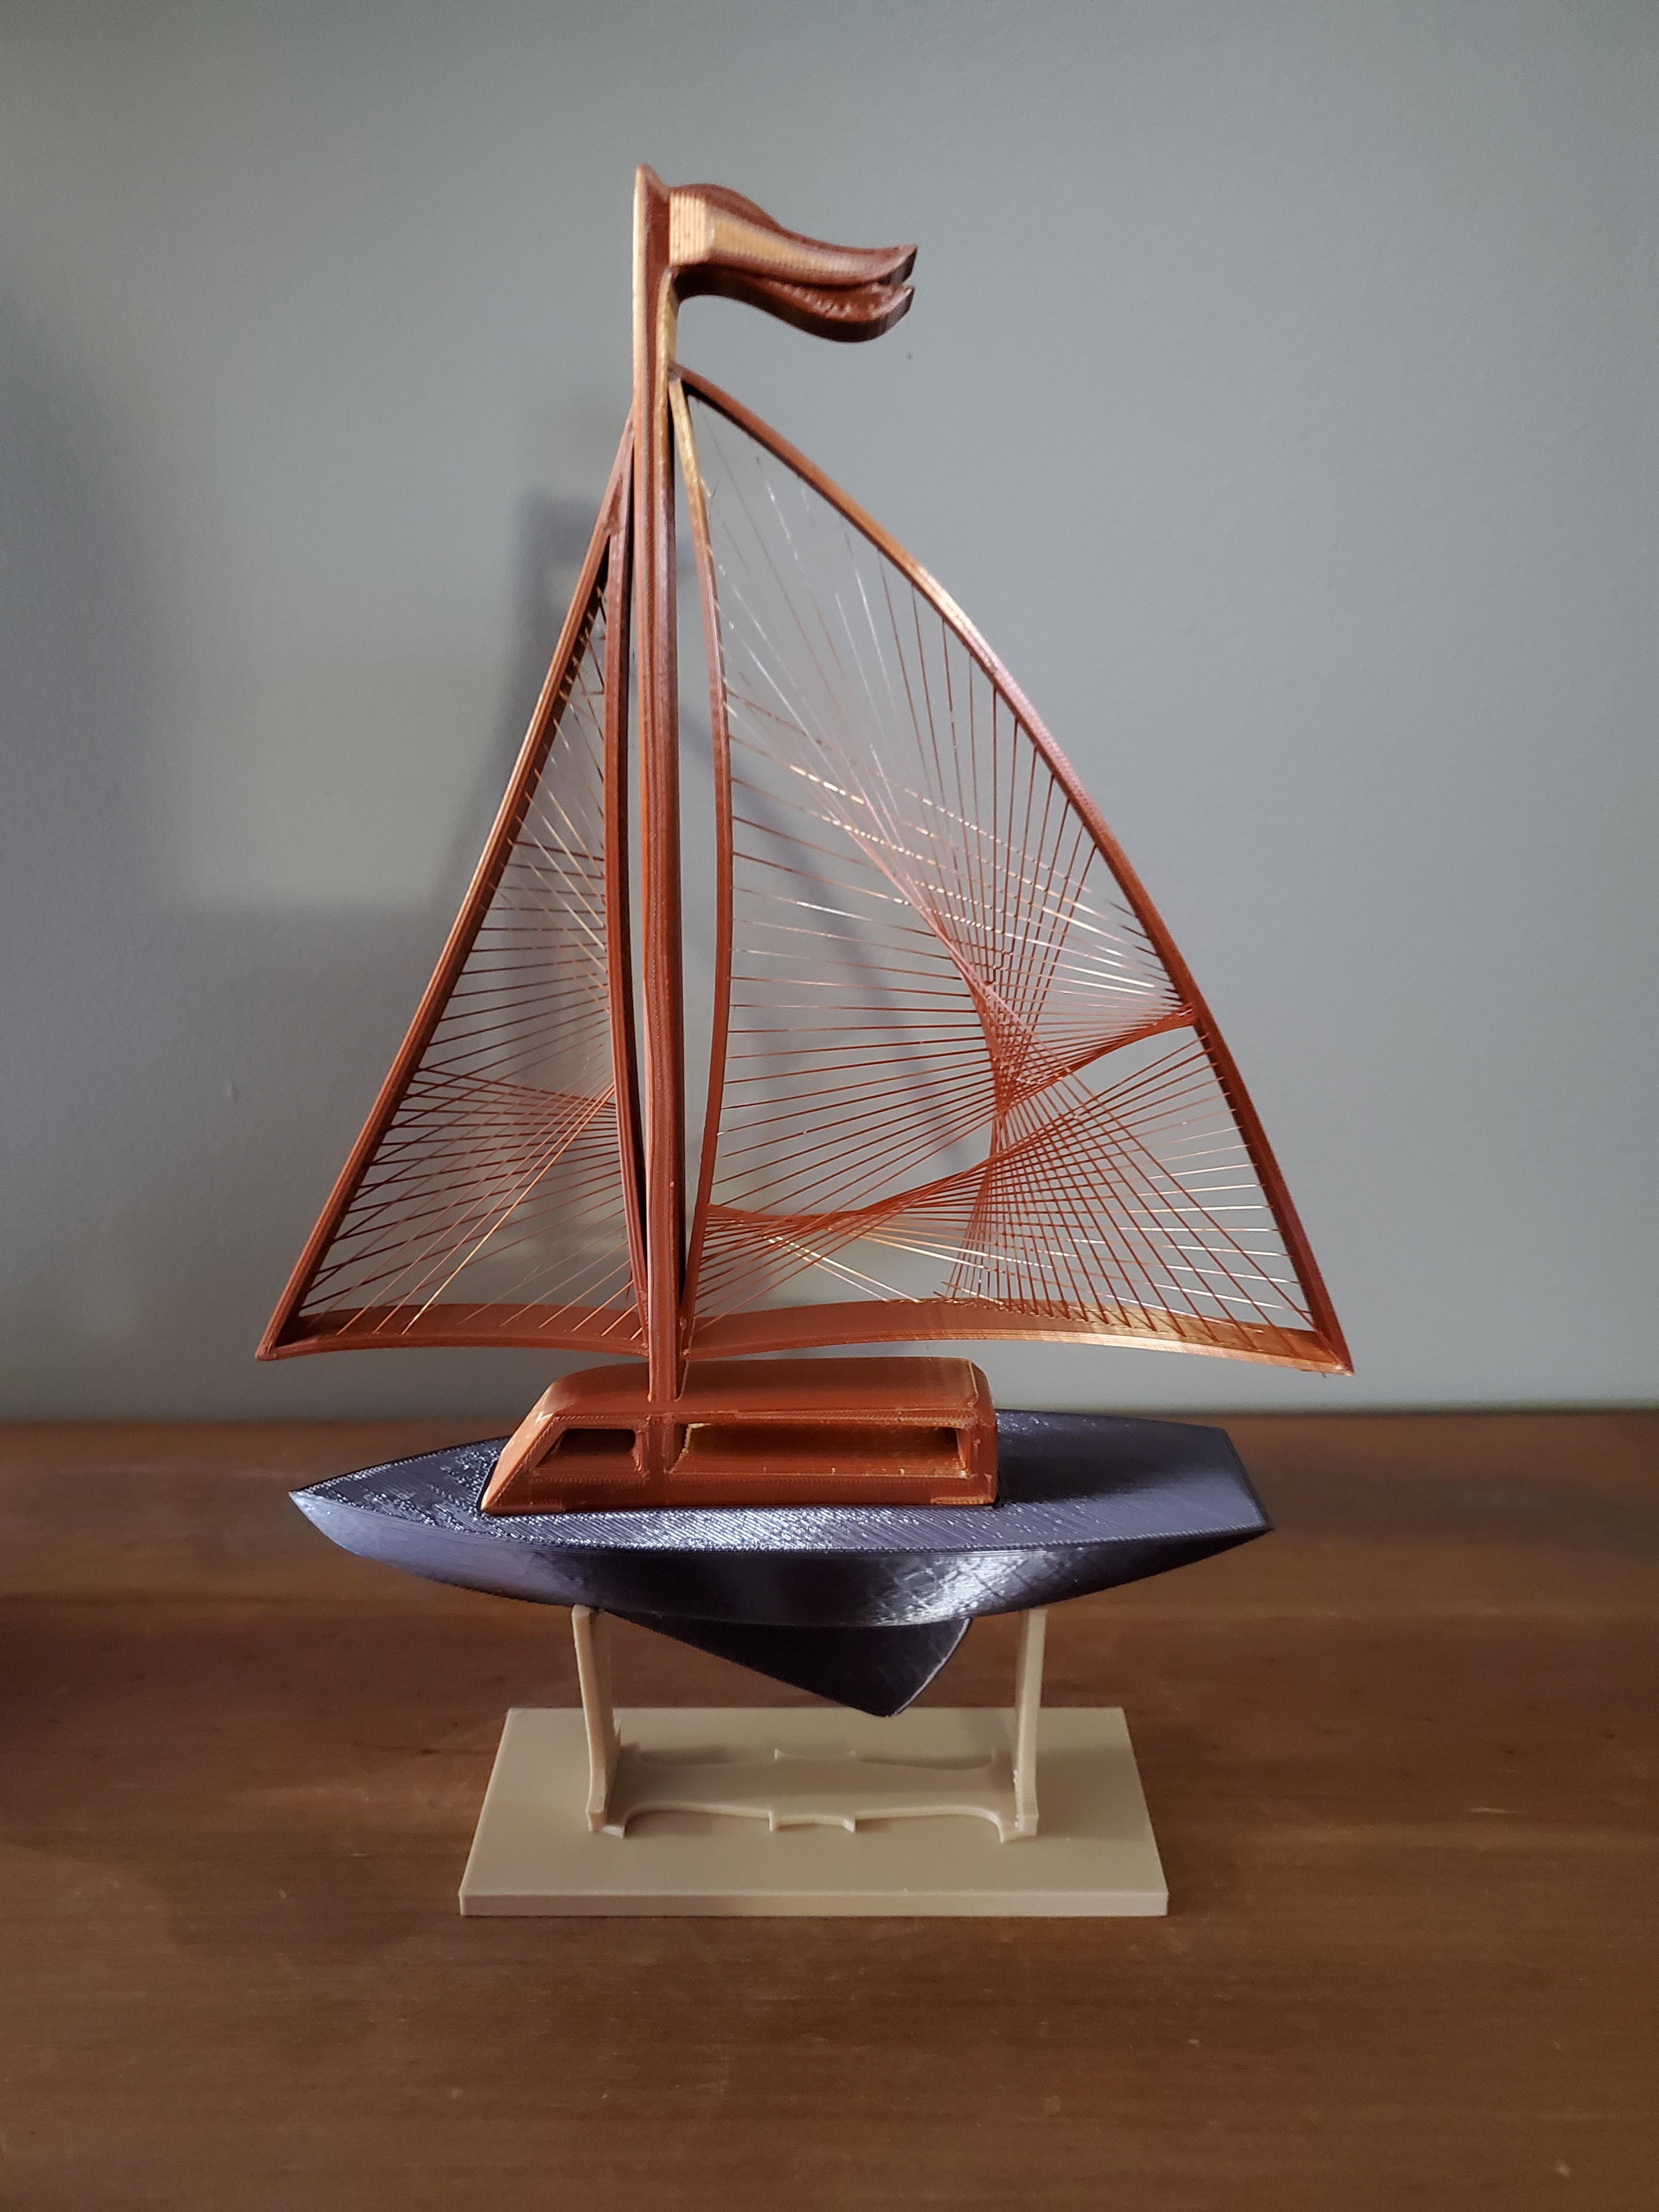 Sailboat - no supports - Added a rectangle base for more stability. 
120mmx50mmx5mm - 3d model